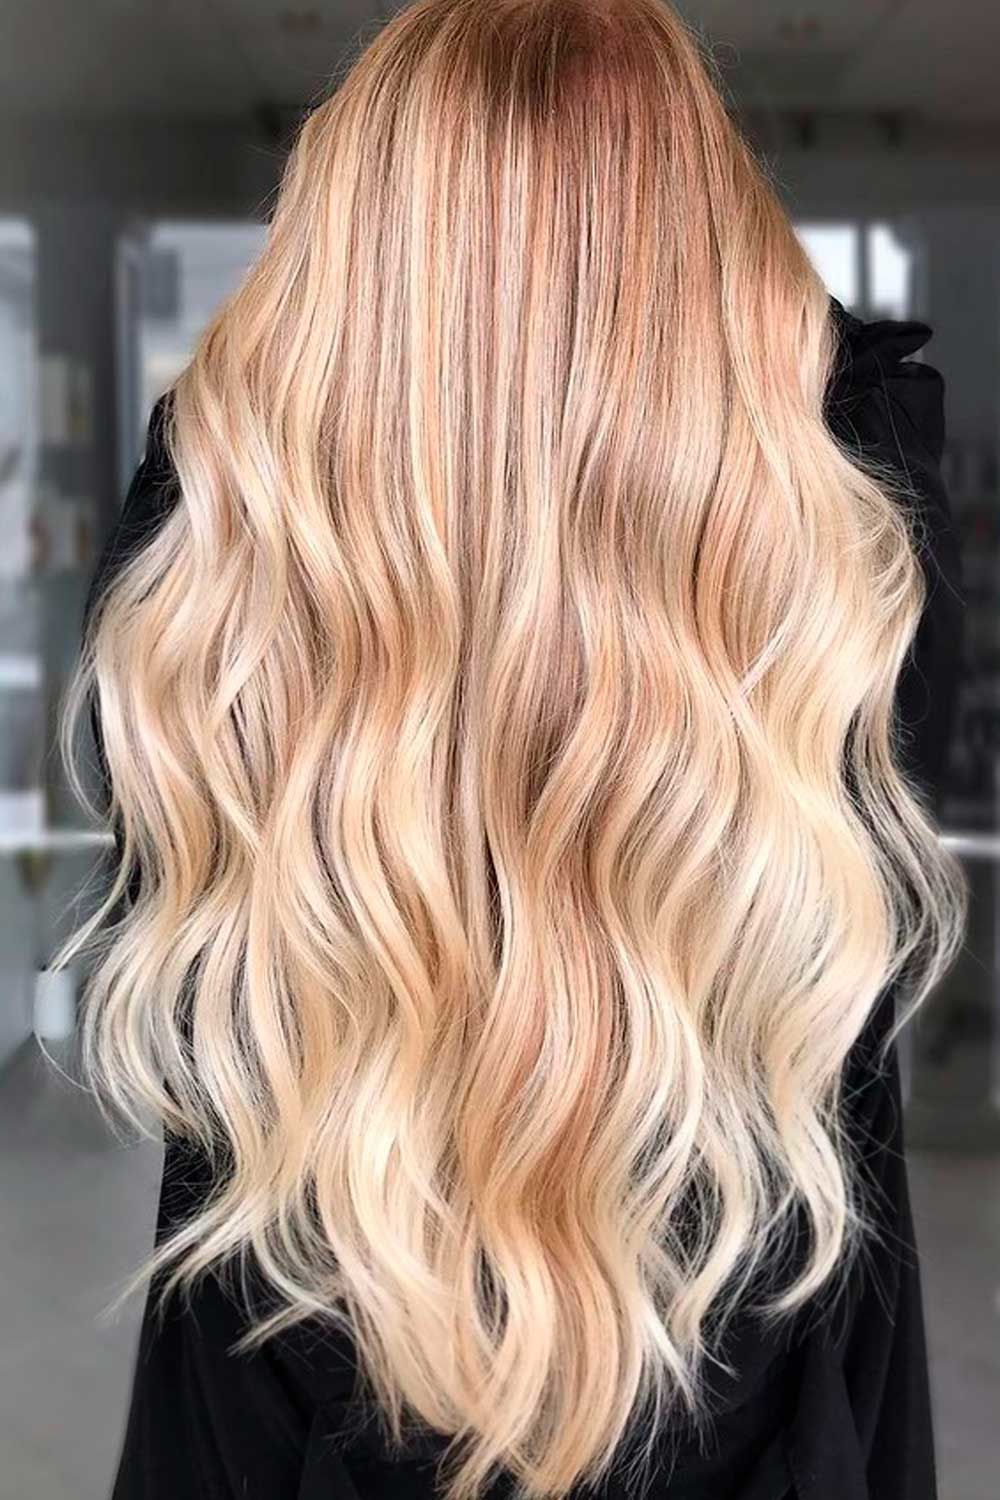 Curly Highlighted Style